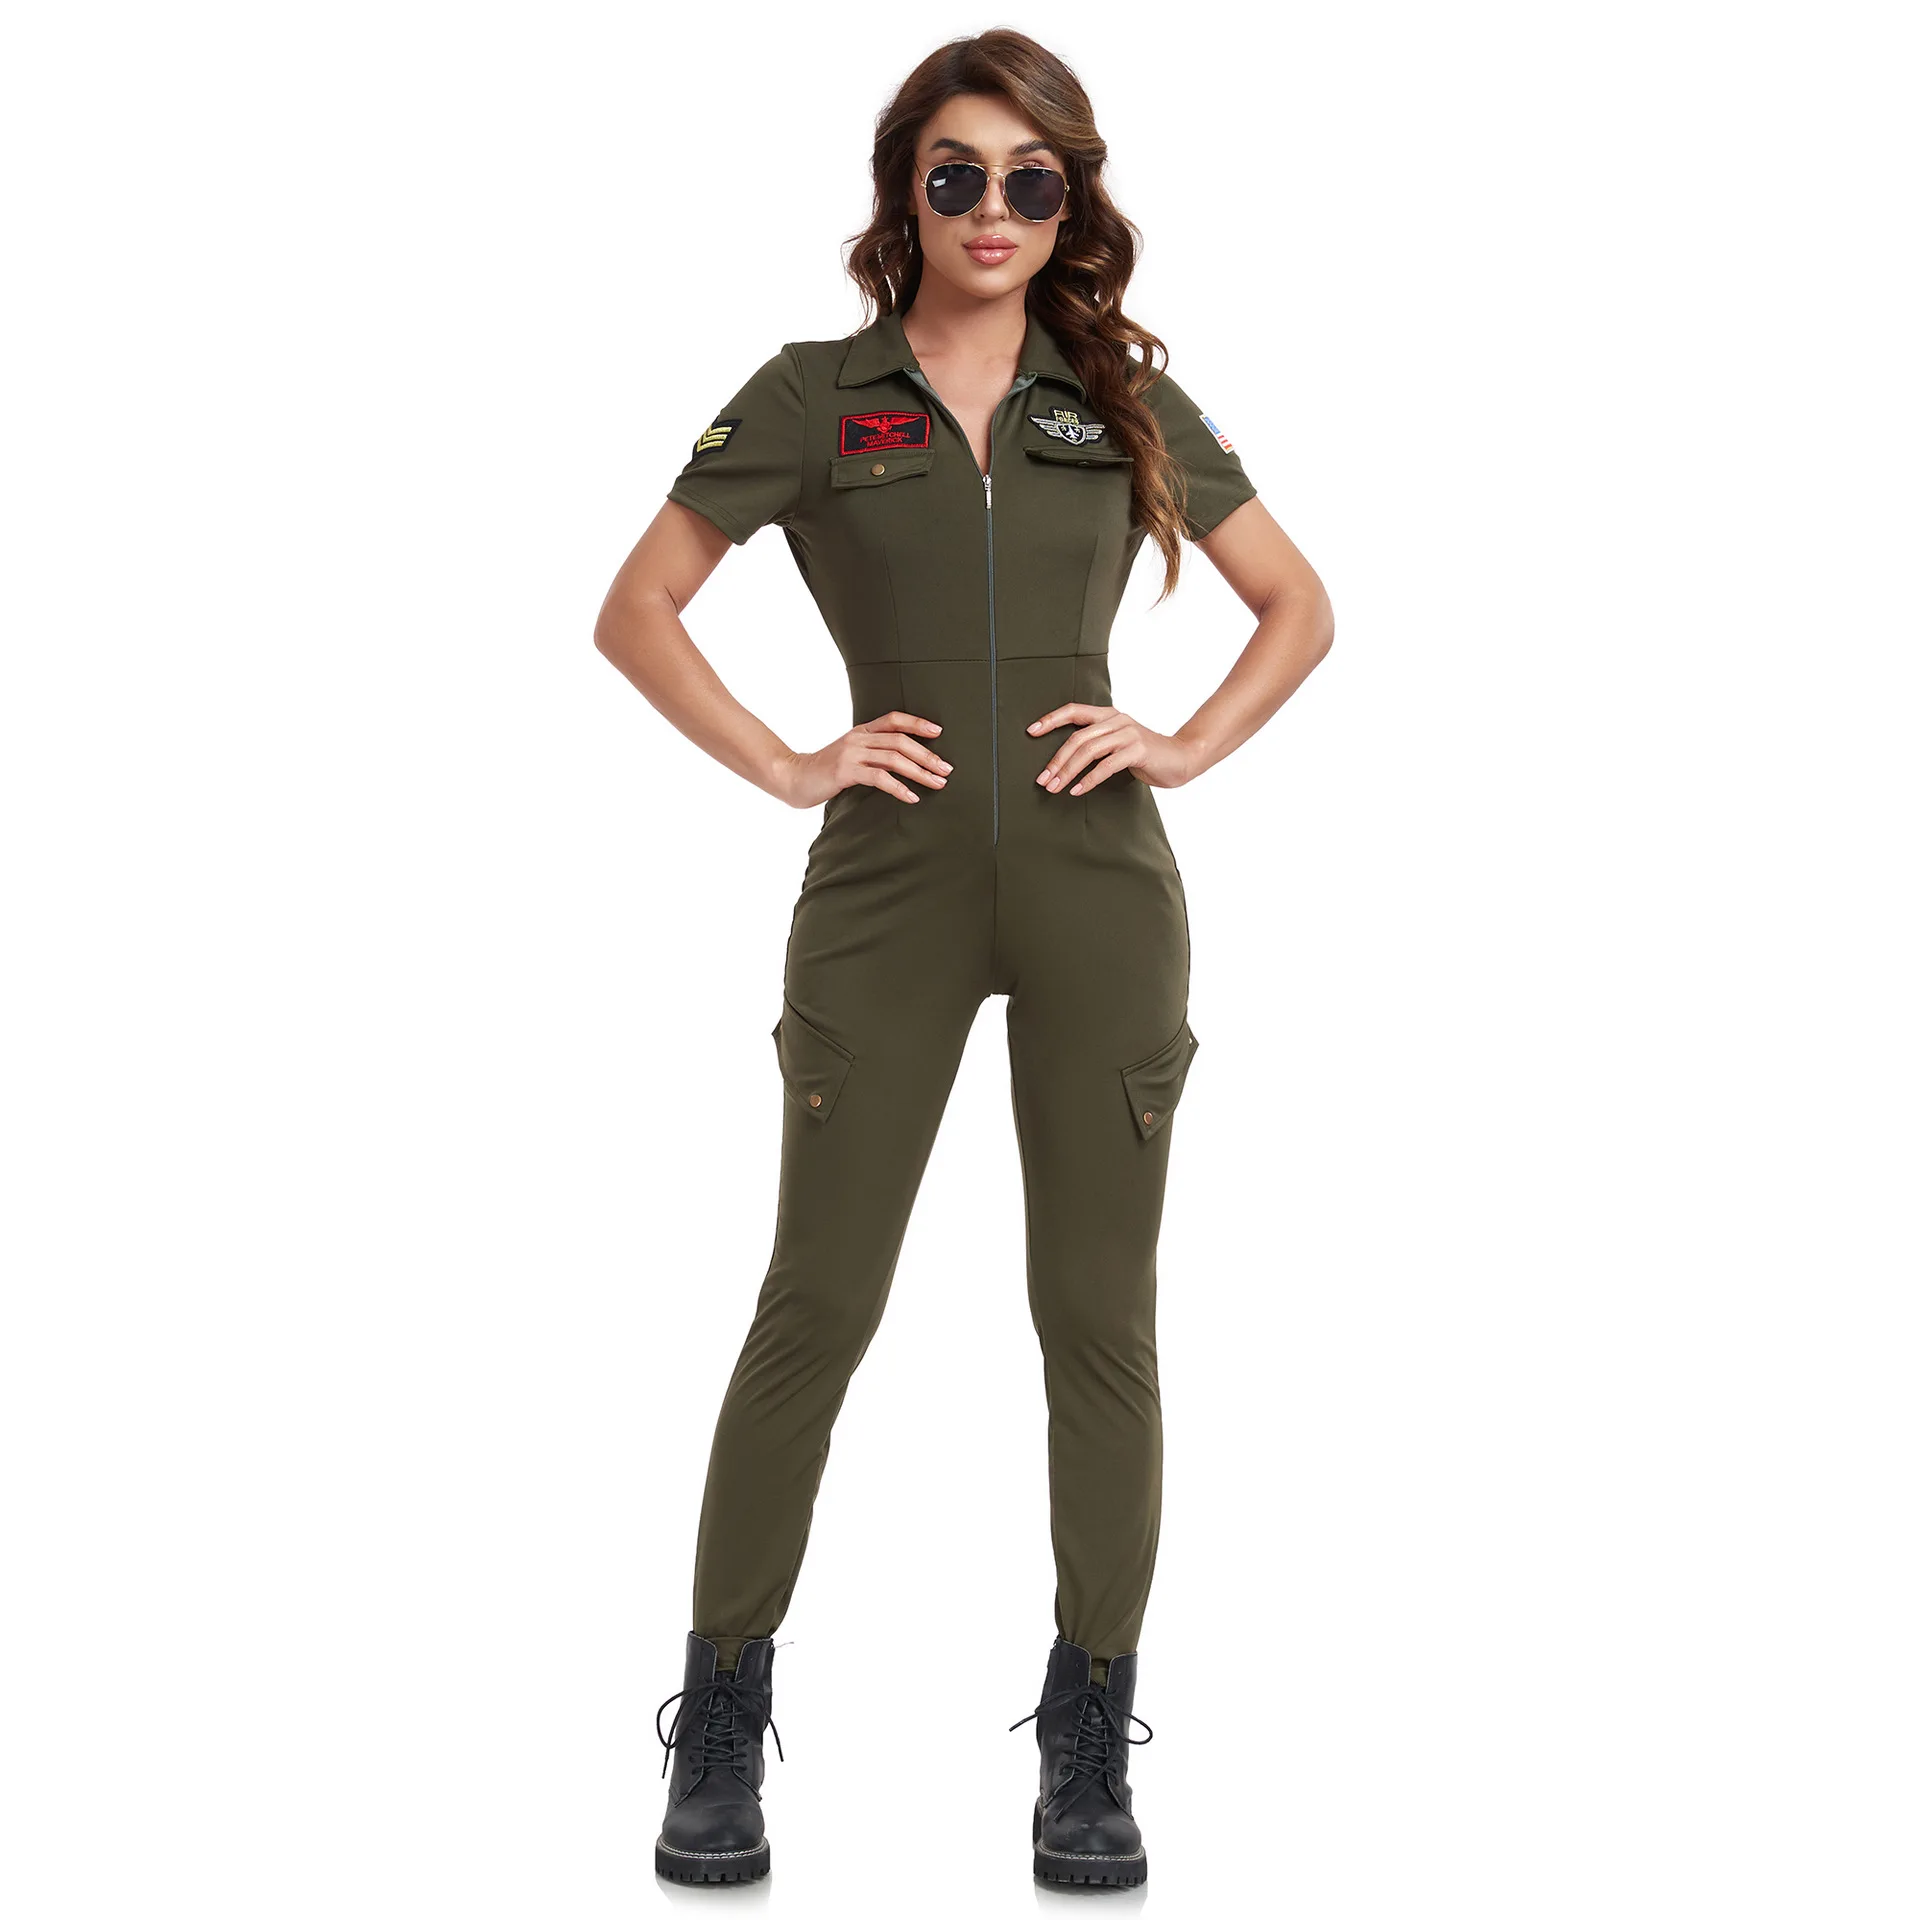 

Women'S Military Pilot Costume Army Green Tight Fitting Zipper Jumpsuit Halloween Carnival Party Cosplay Militarily Flight Suit